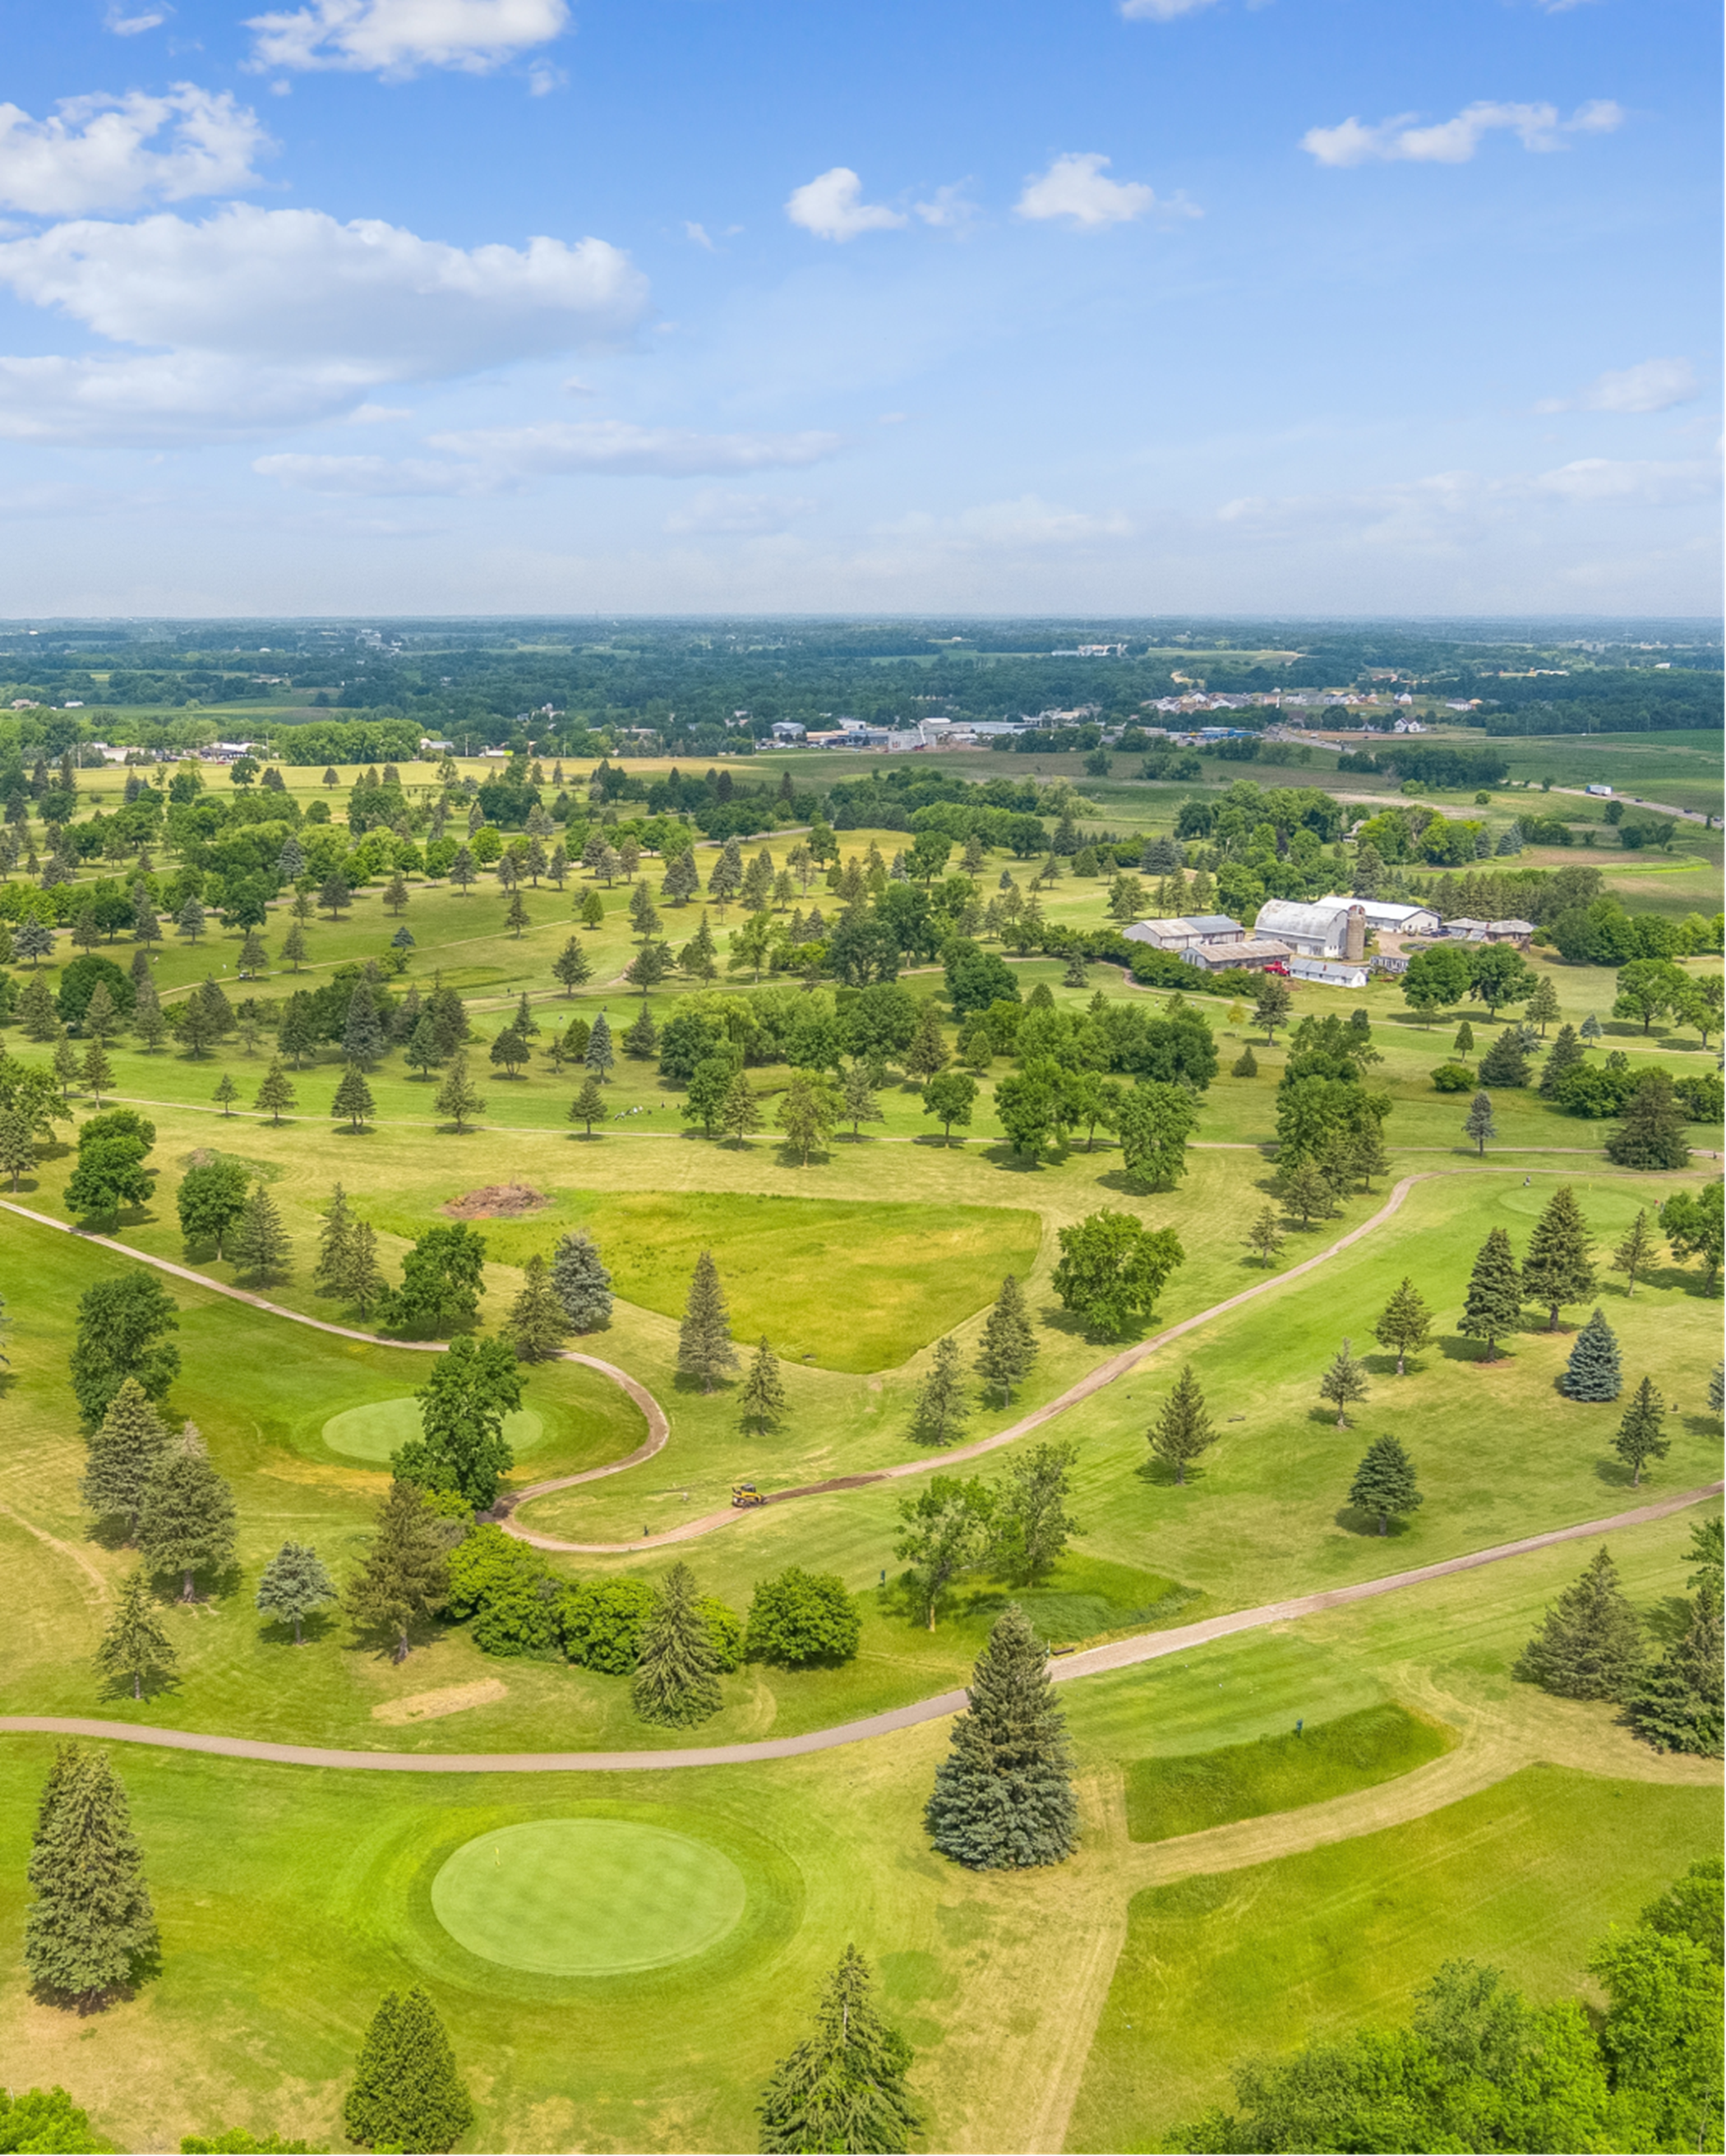 Golf course and driving range aerial